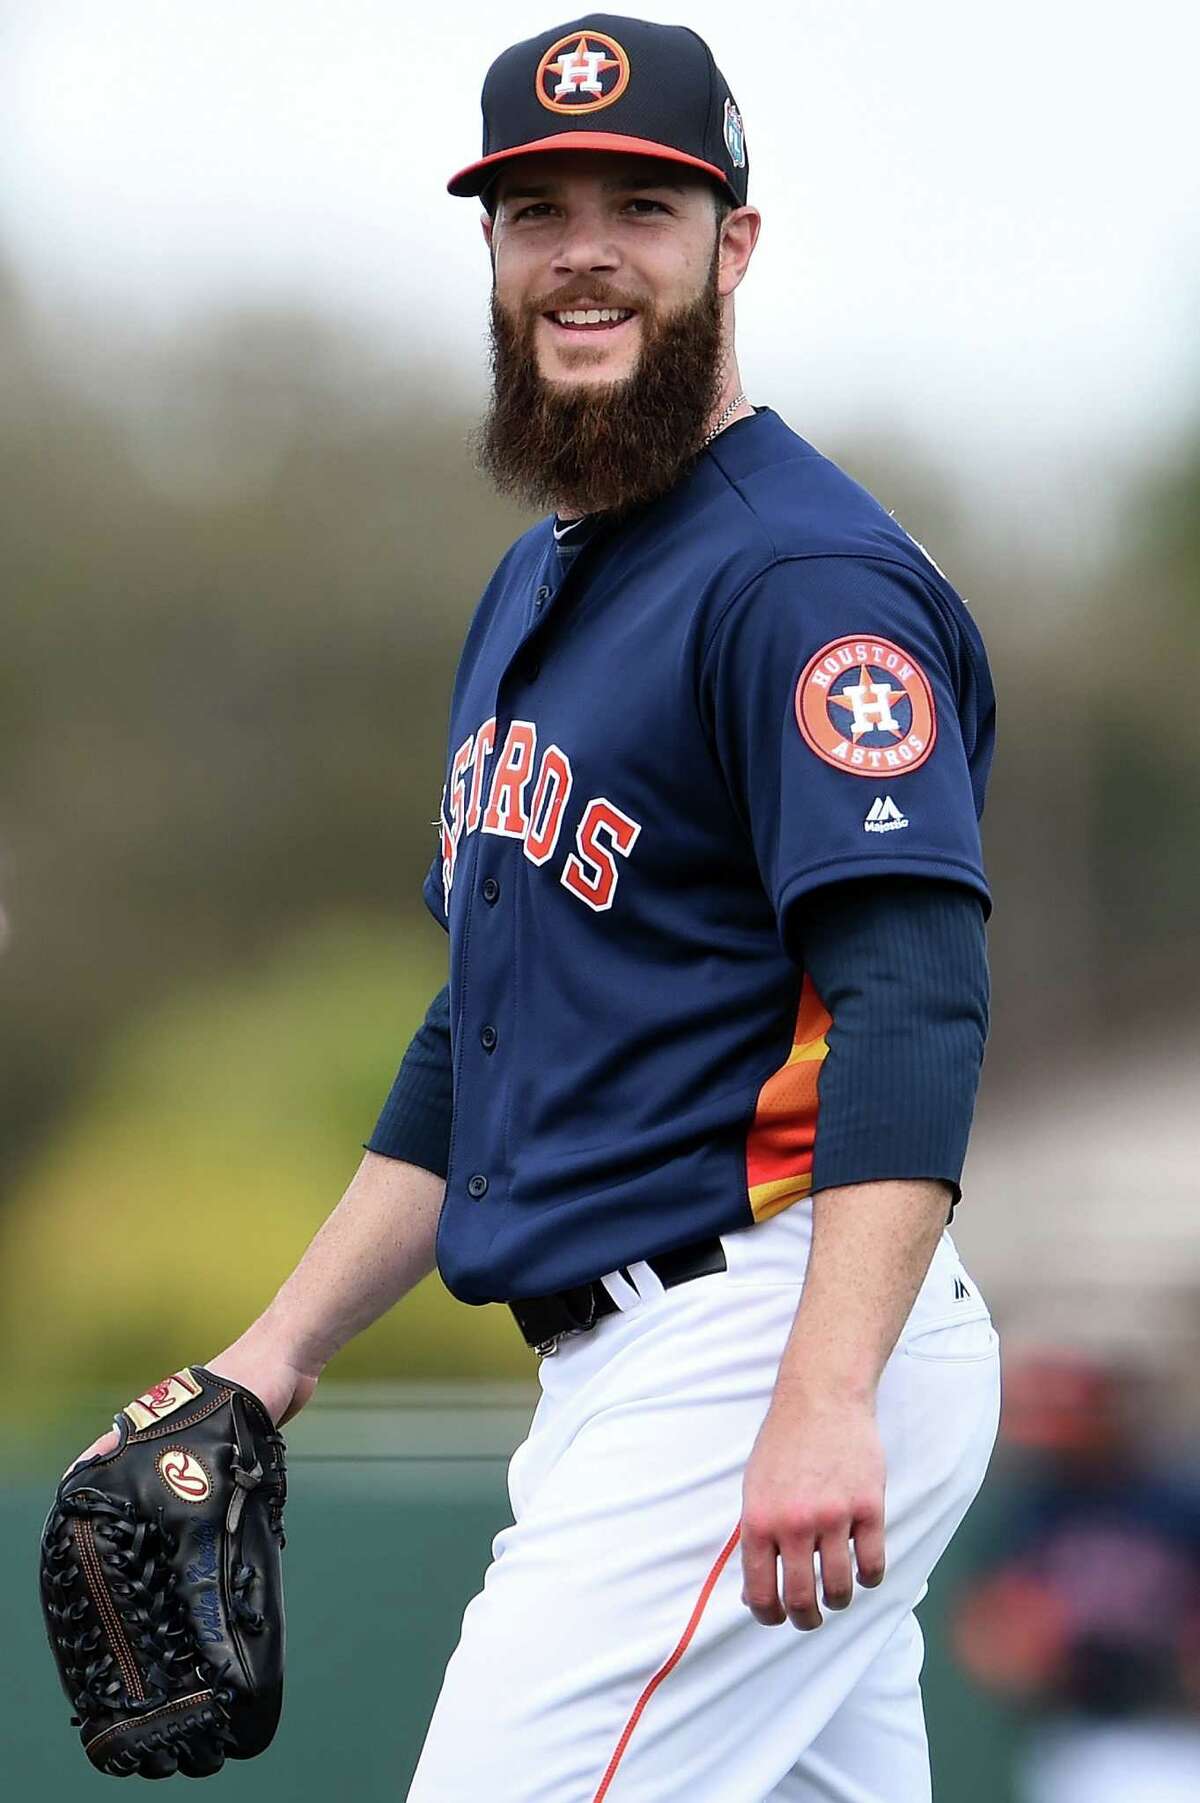 KISSIMMEE, FL - MARCH 09: Dallas Keuchel #60 of the Houston Astros walks to the dugout during the second inning of a spring training game against the Atlanta Braves at Osceola County Stadium on March 9, 2016 in Kissimmee, Florida.